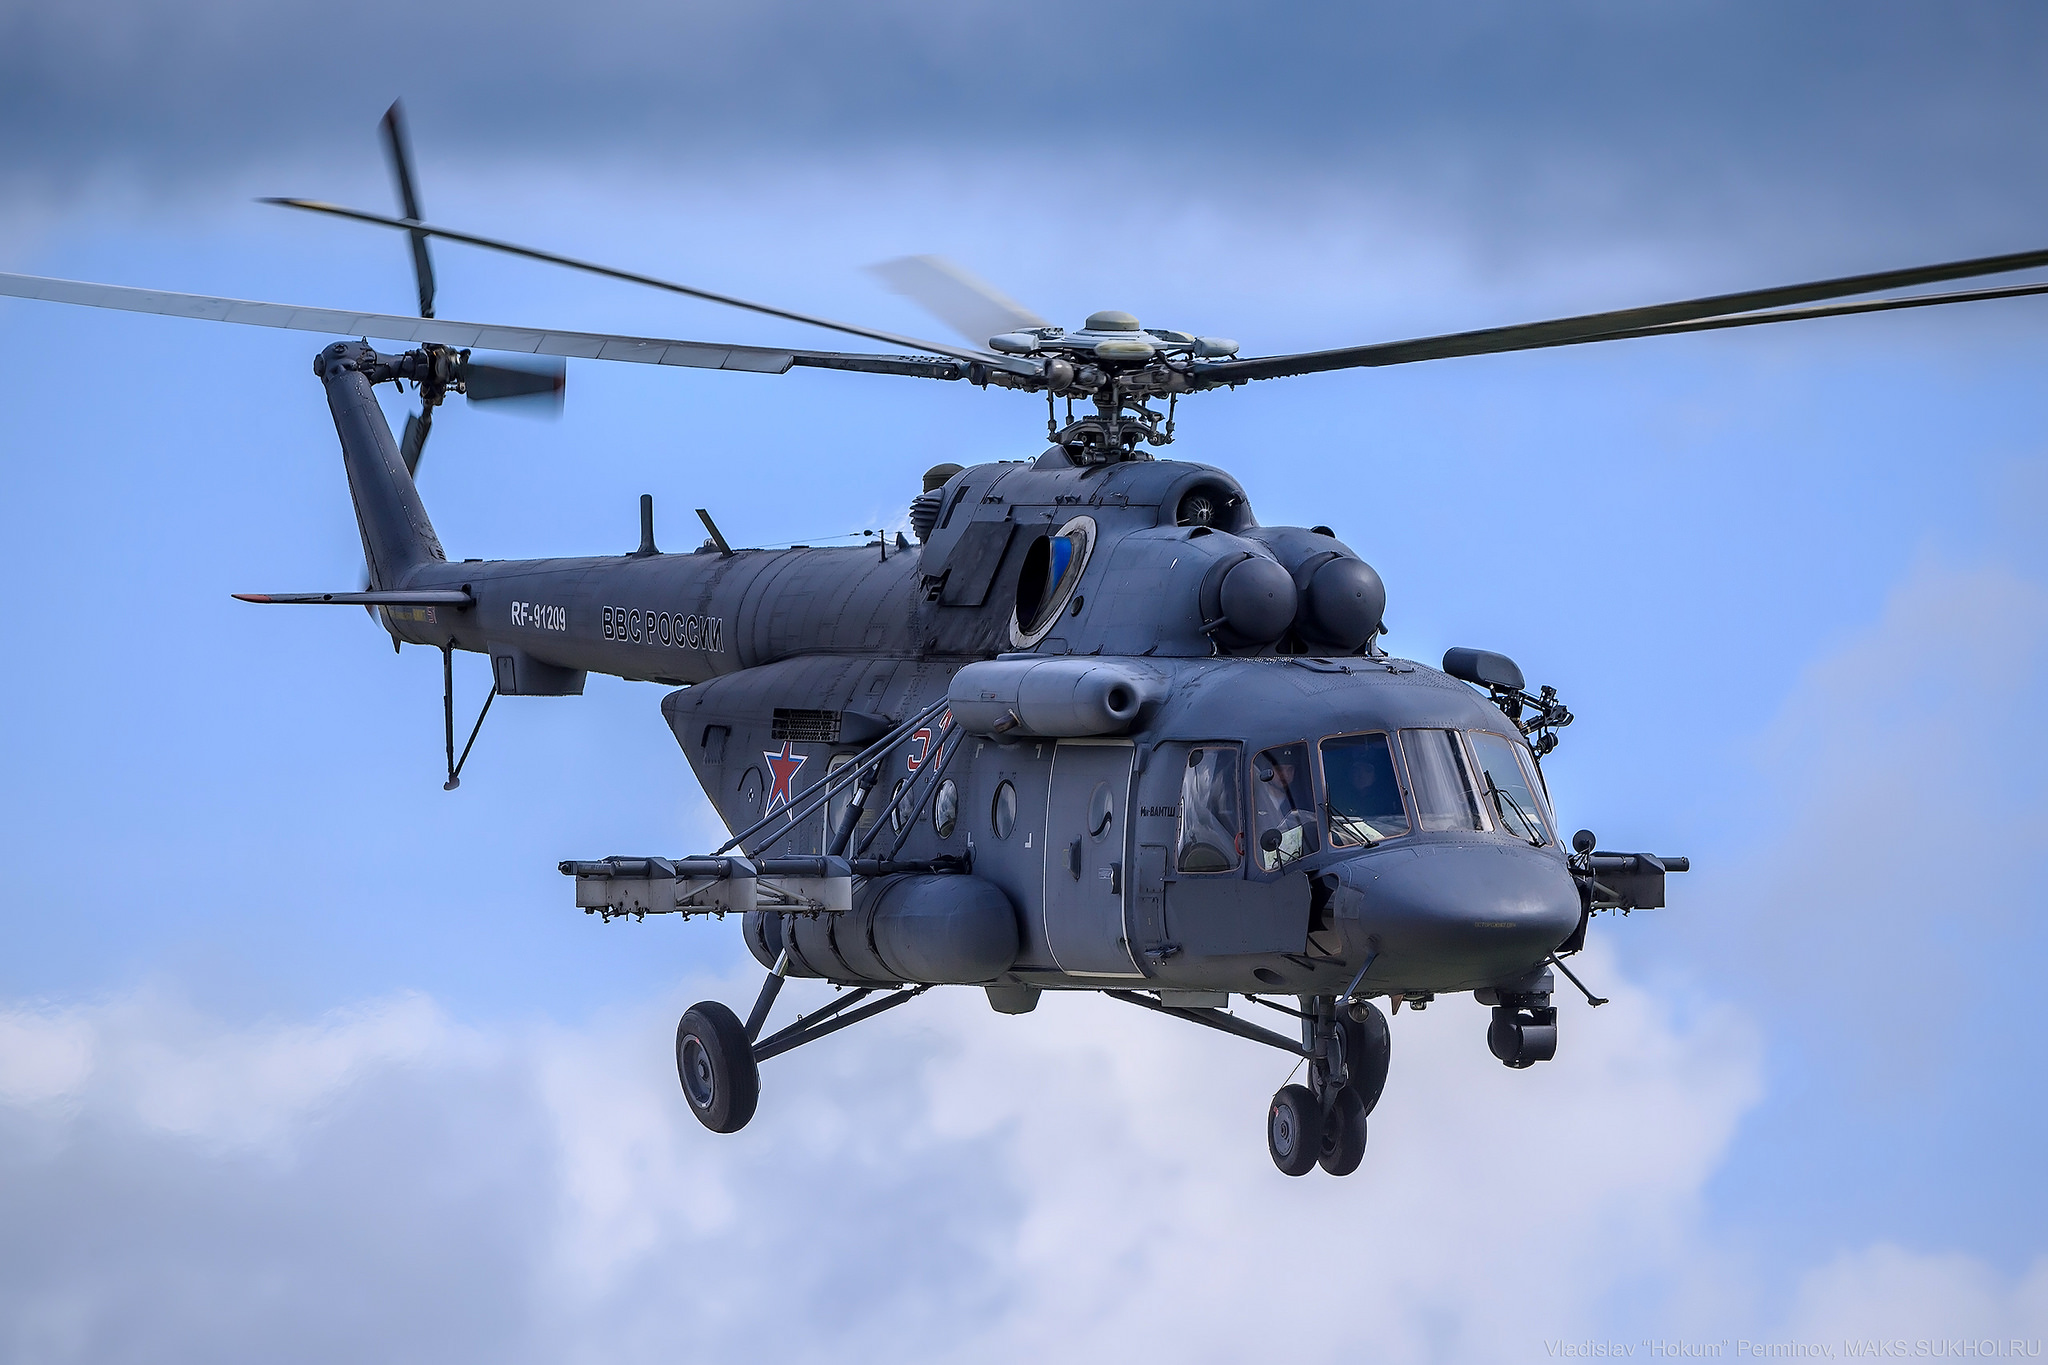 General 2048x1365 Russian Air Force Mil Mi-17 vehicle helicopters military military aircraft Russian/Soviet aircraft sky clouds Mil Helicopters frontal view pilot